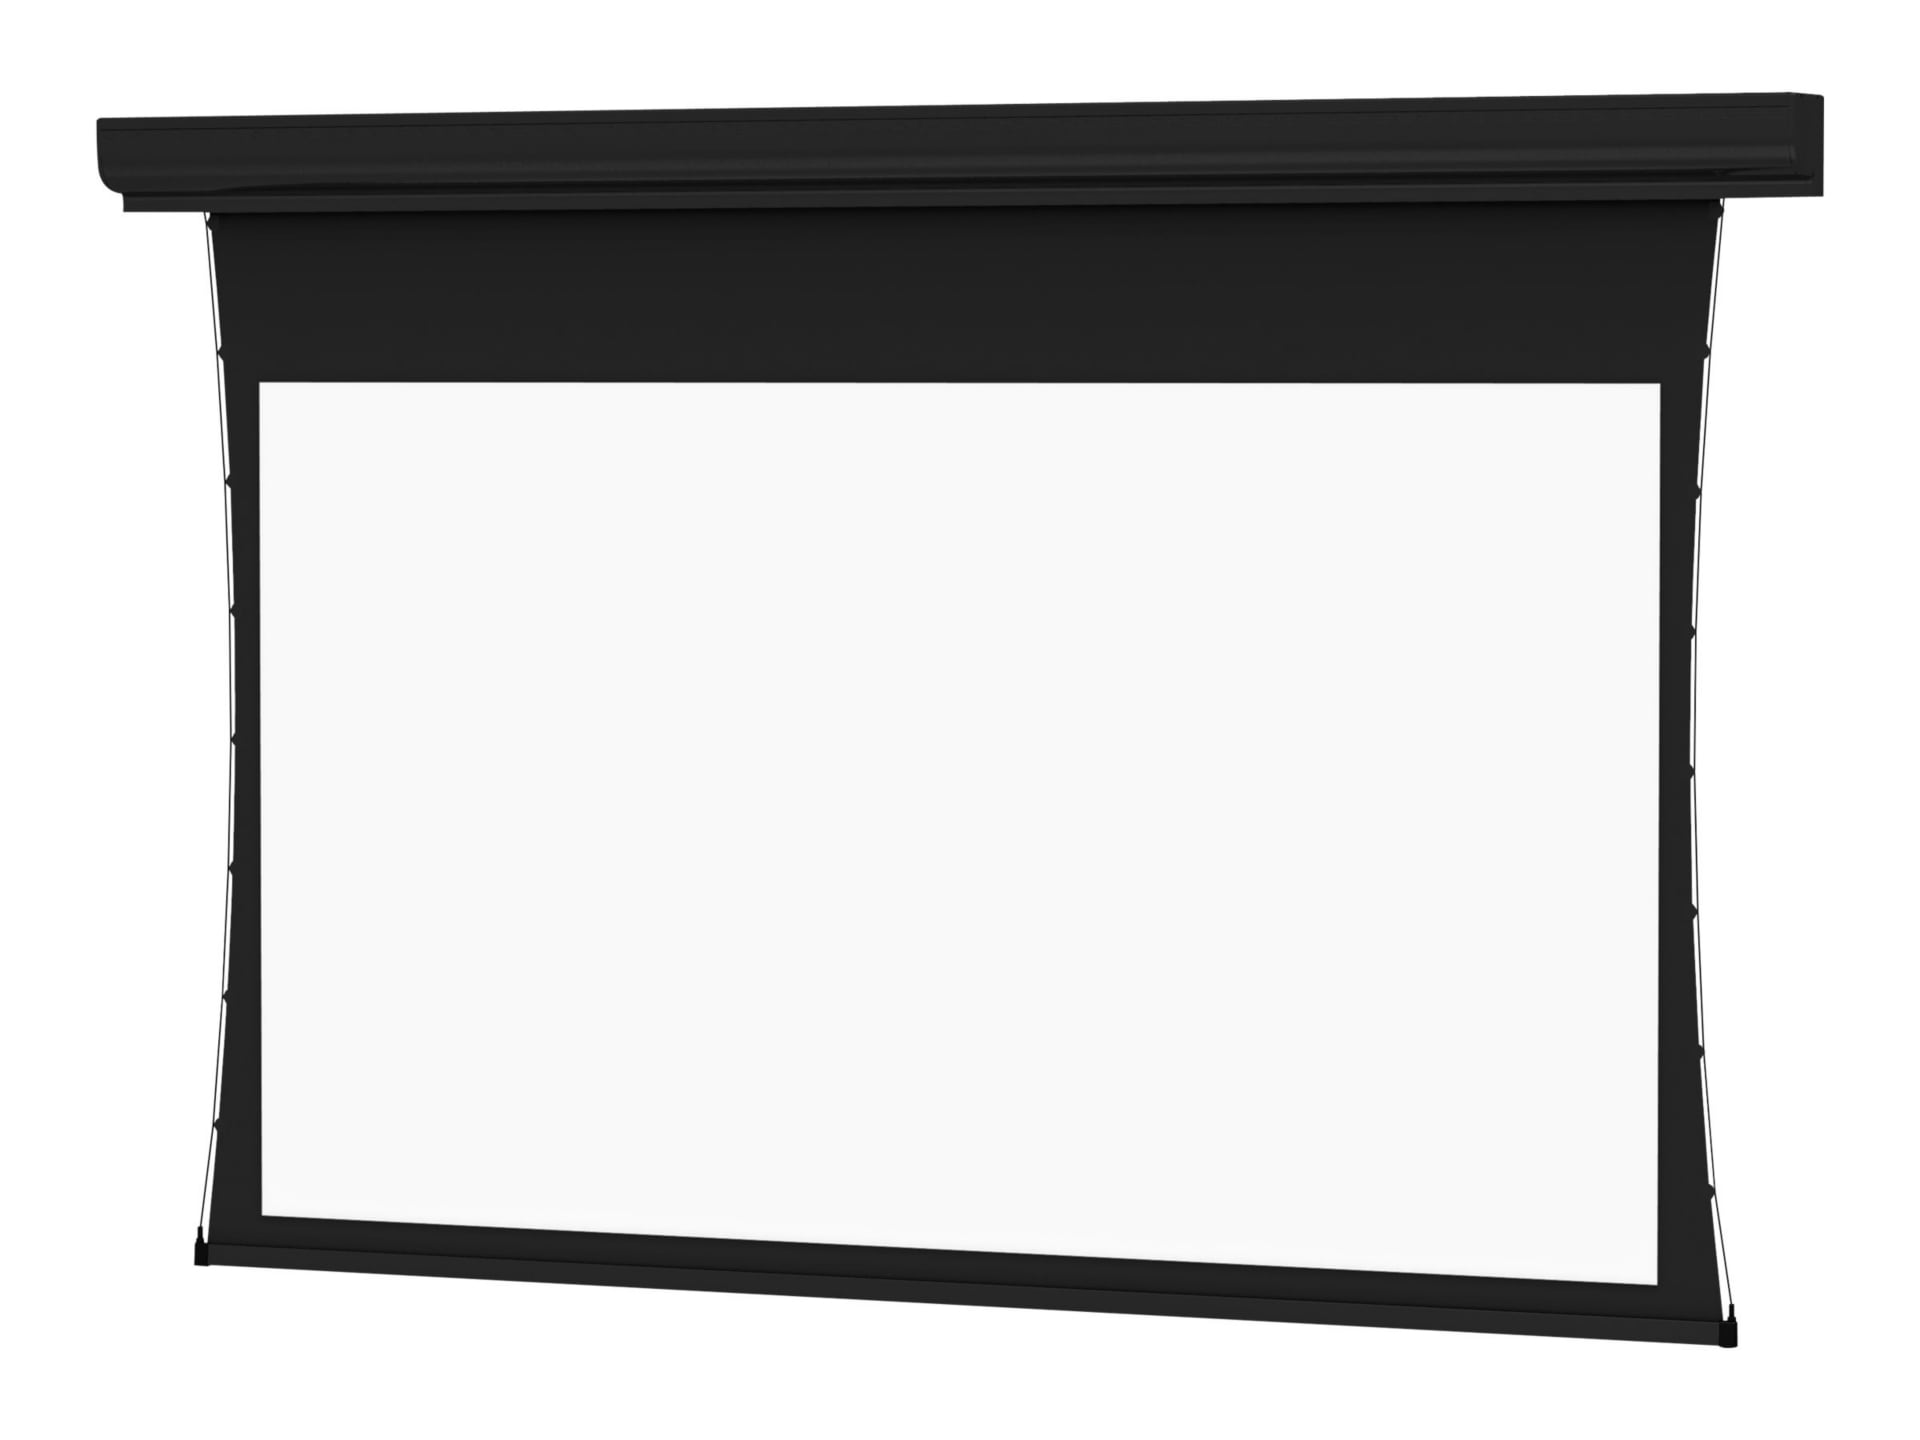 Da-Lite Tensioned Contour Electrol HDTV Format - projection screen - 133" (133.1 in)